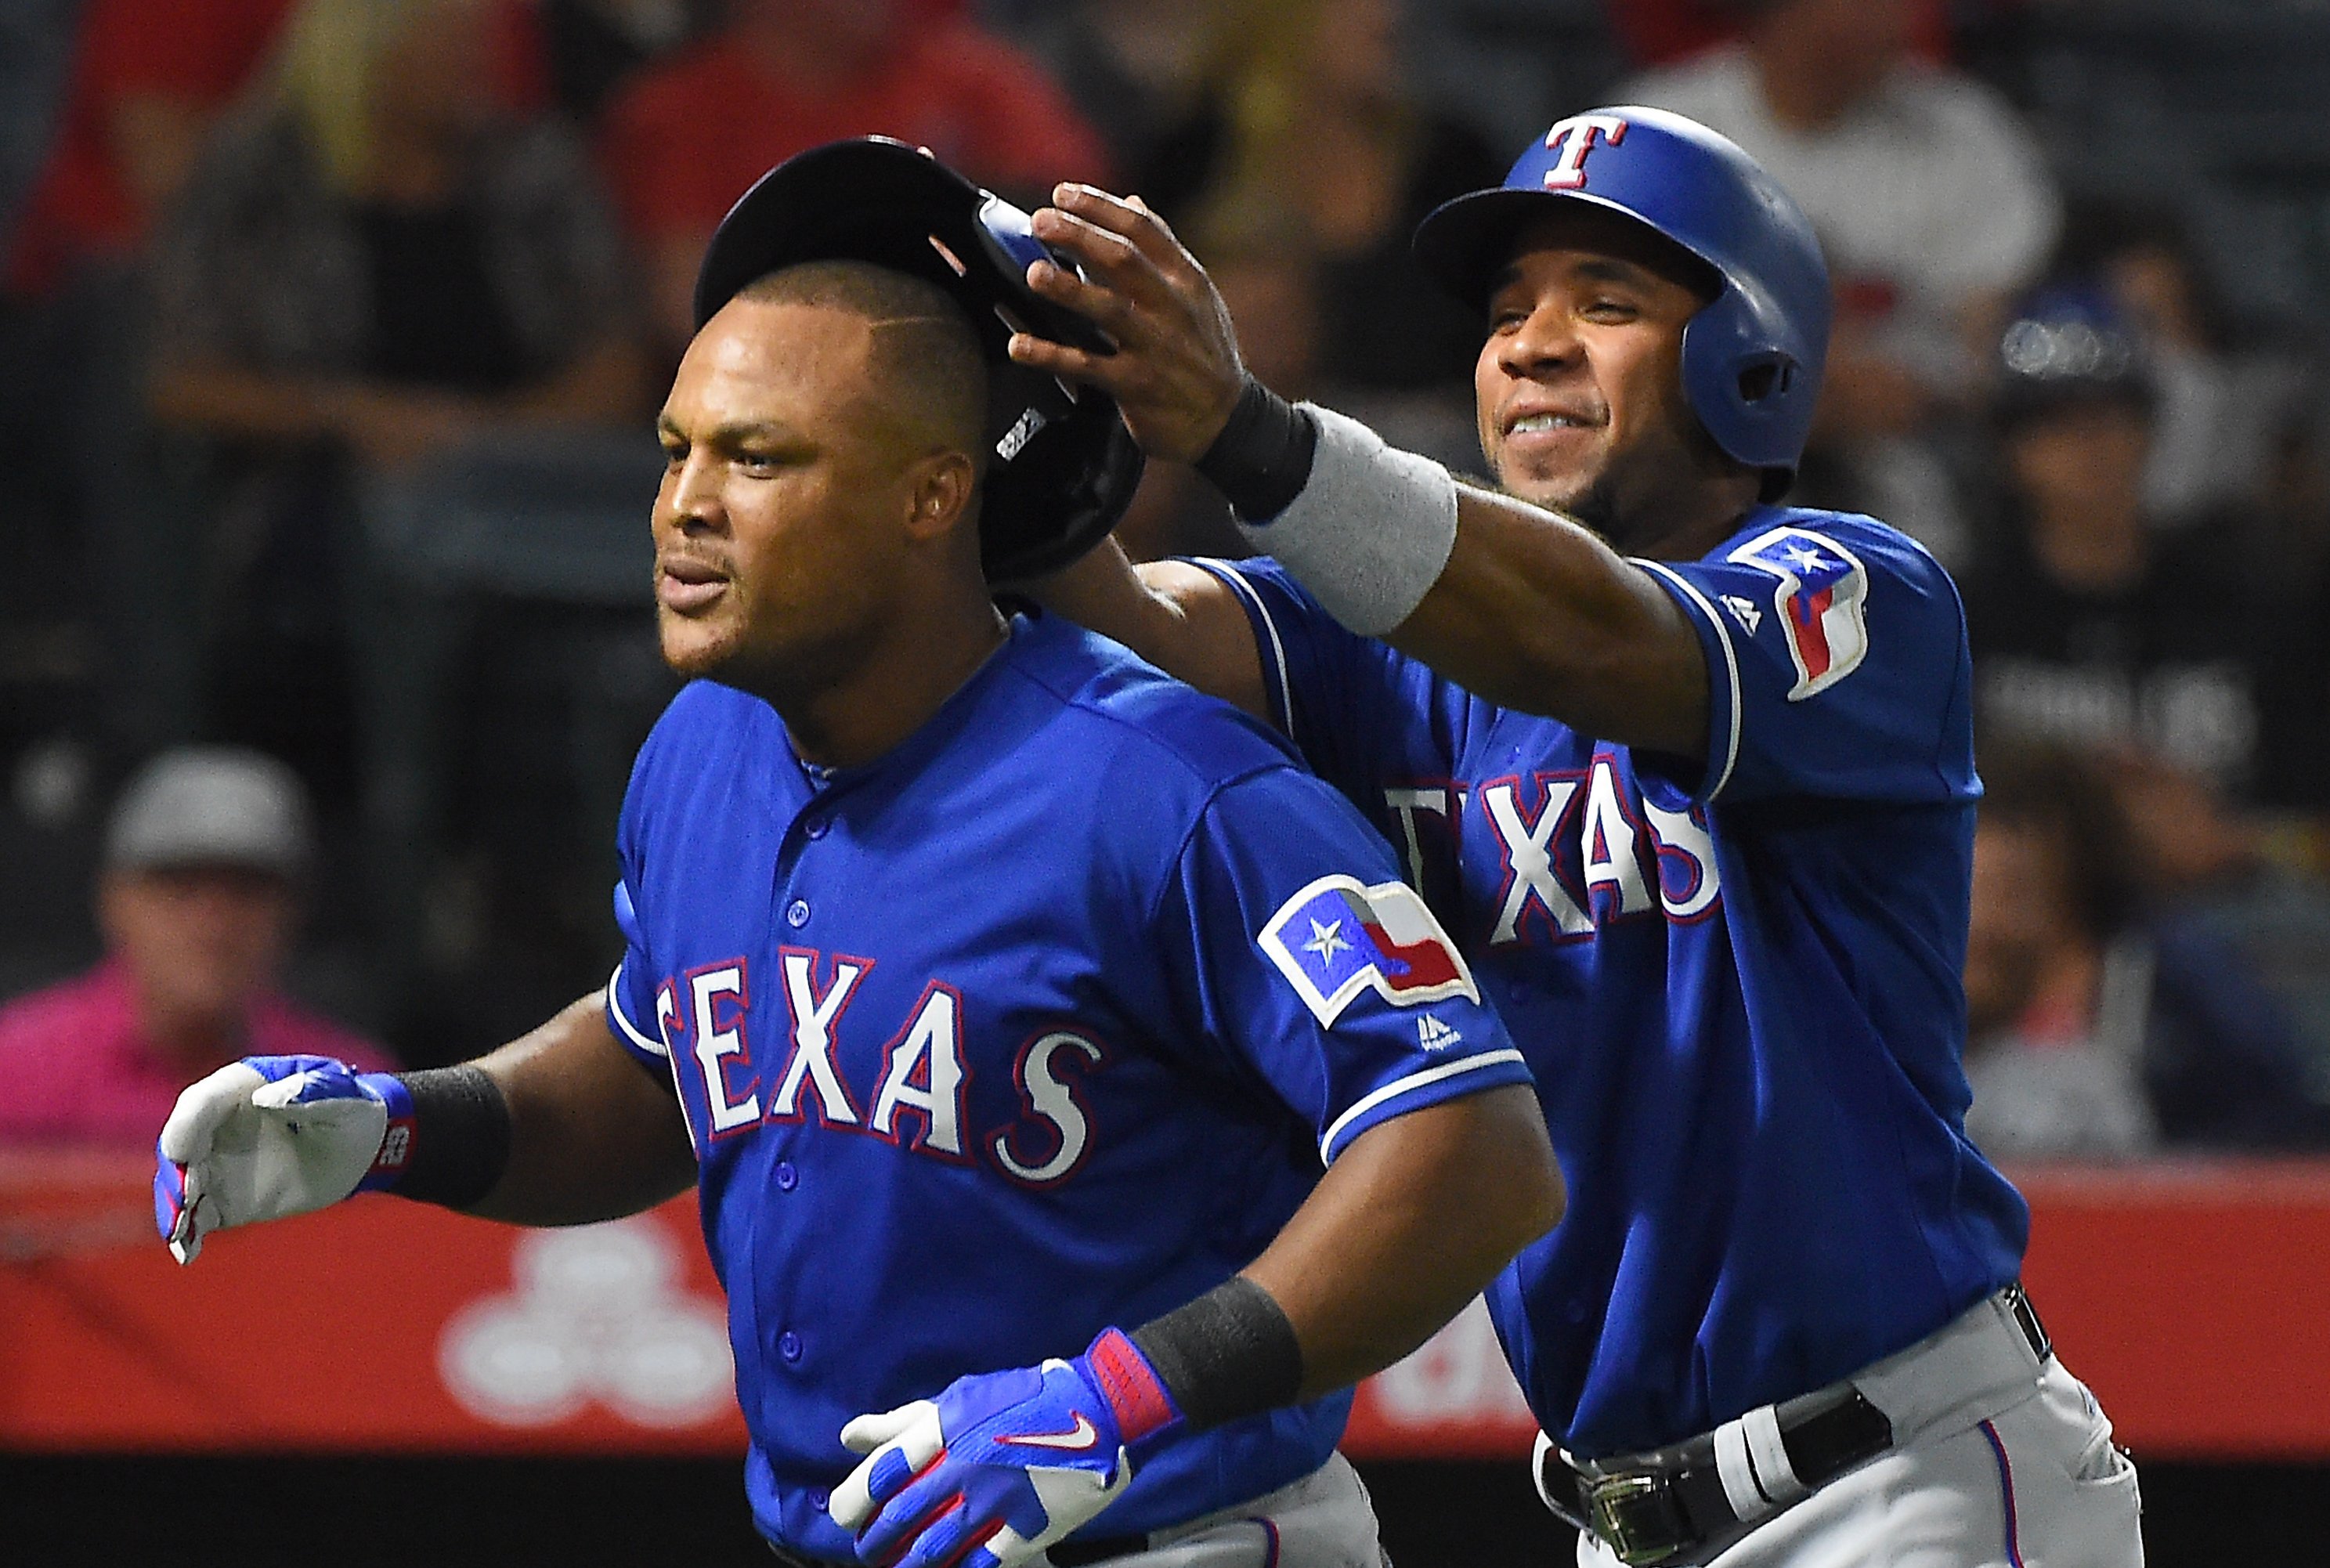 What Happened To Adrian Beltre? (Story)